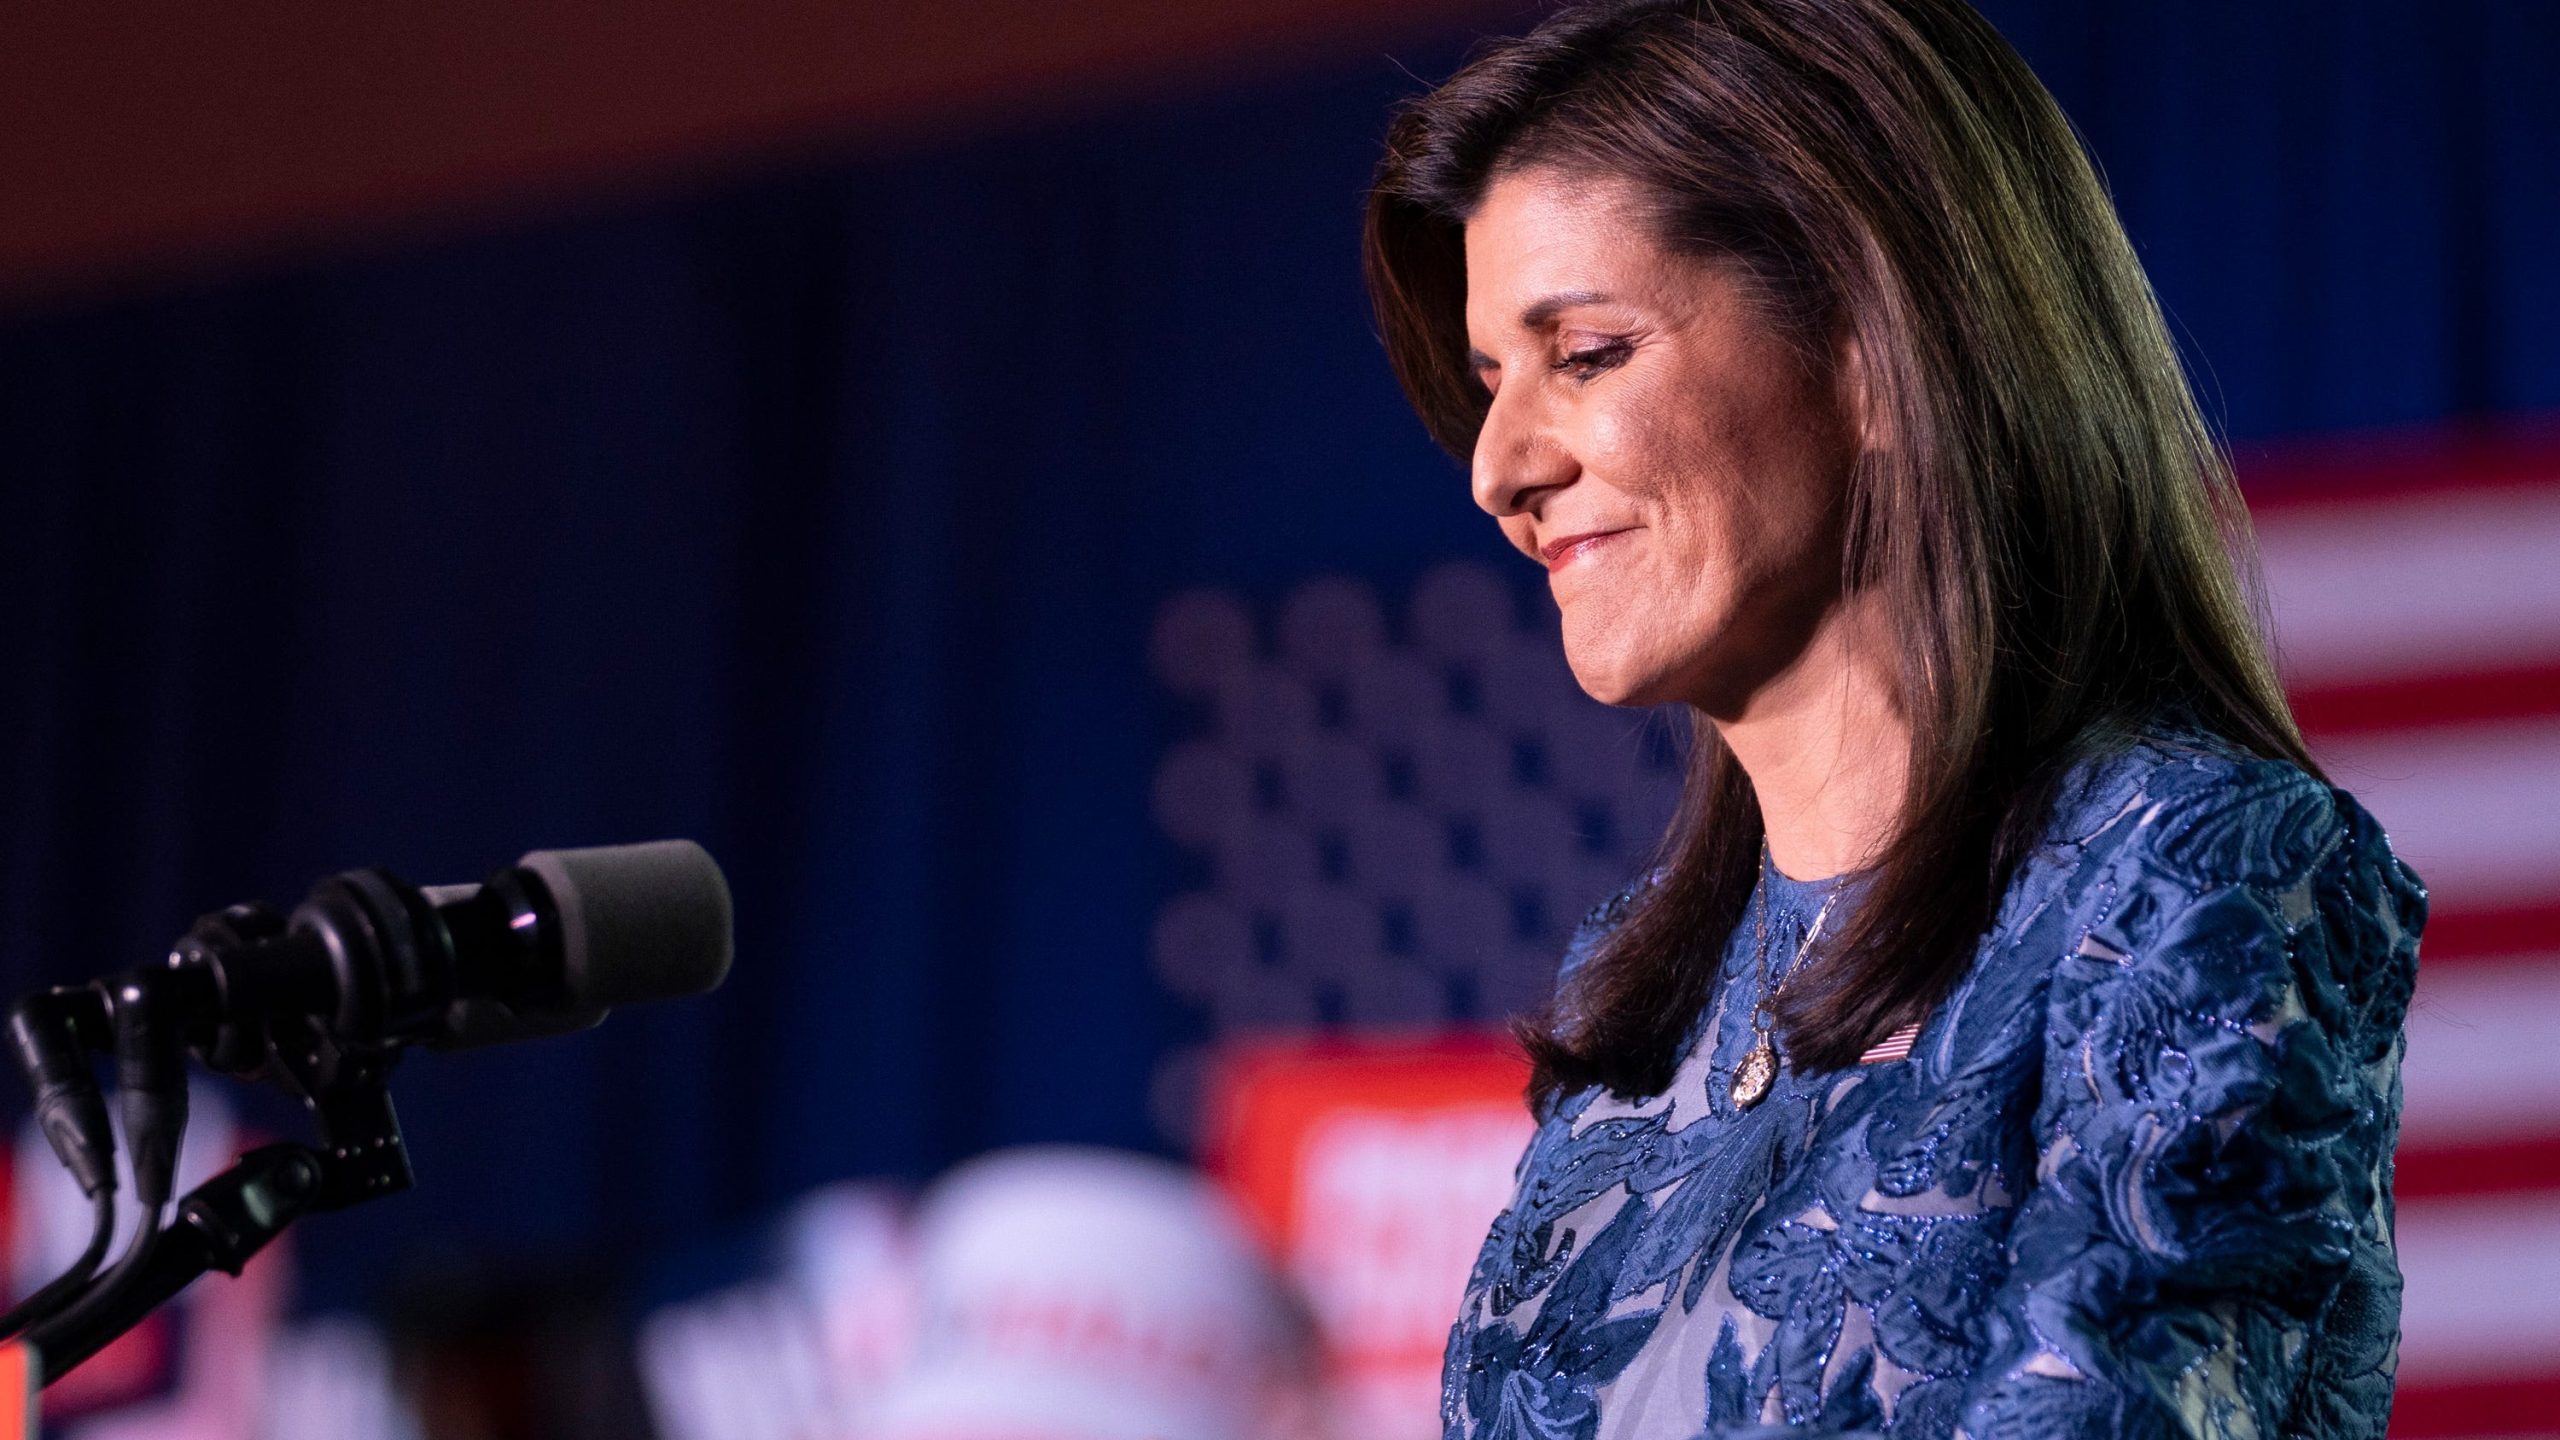 Nikki Haley Pledges to Stay in Race Following New Hampshire Loss: 'Race is Far from Over!'